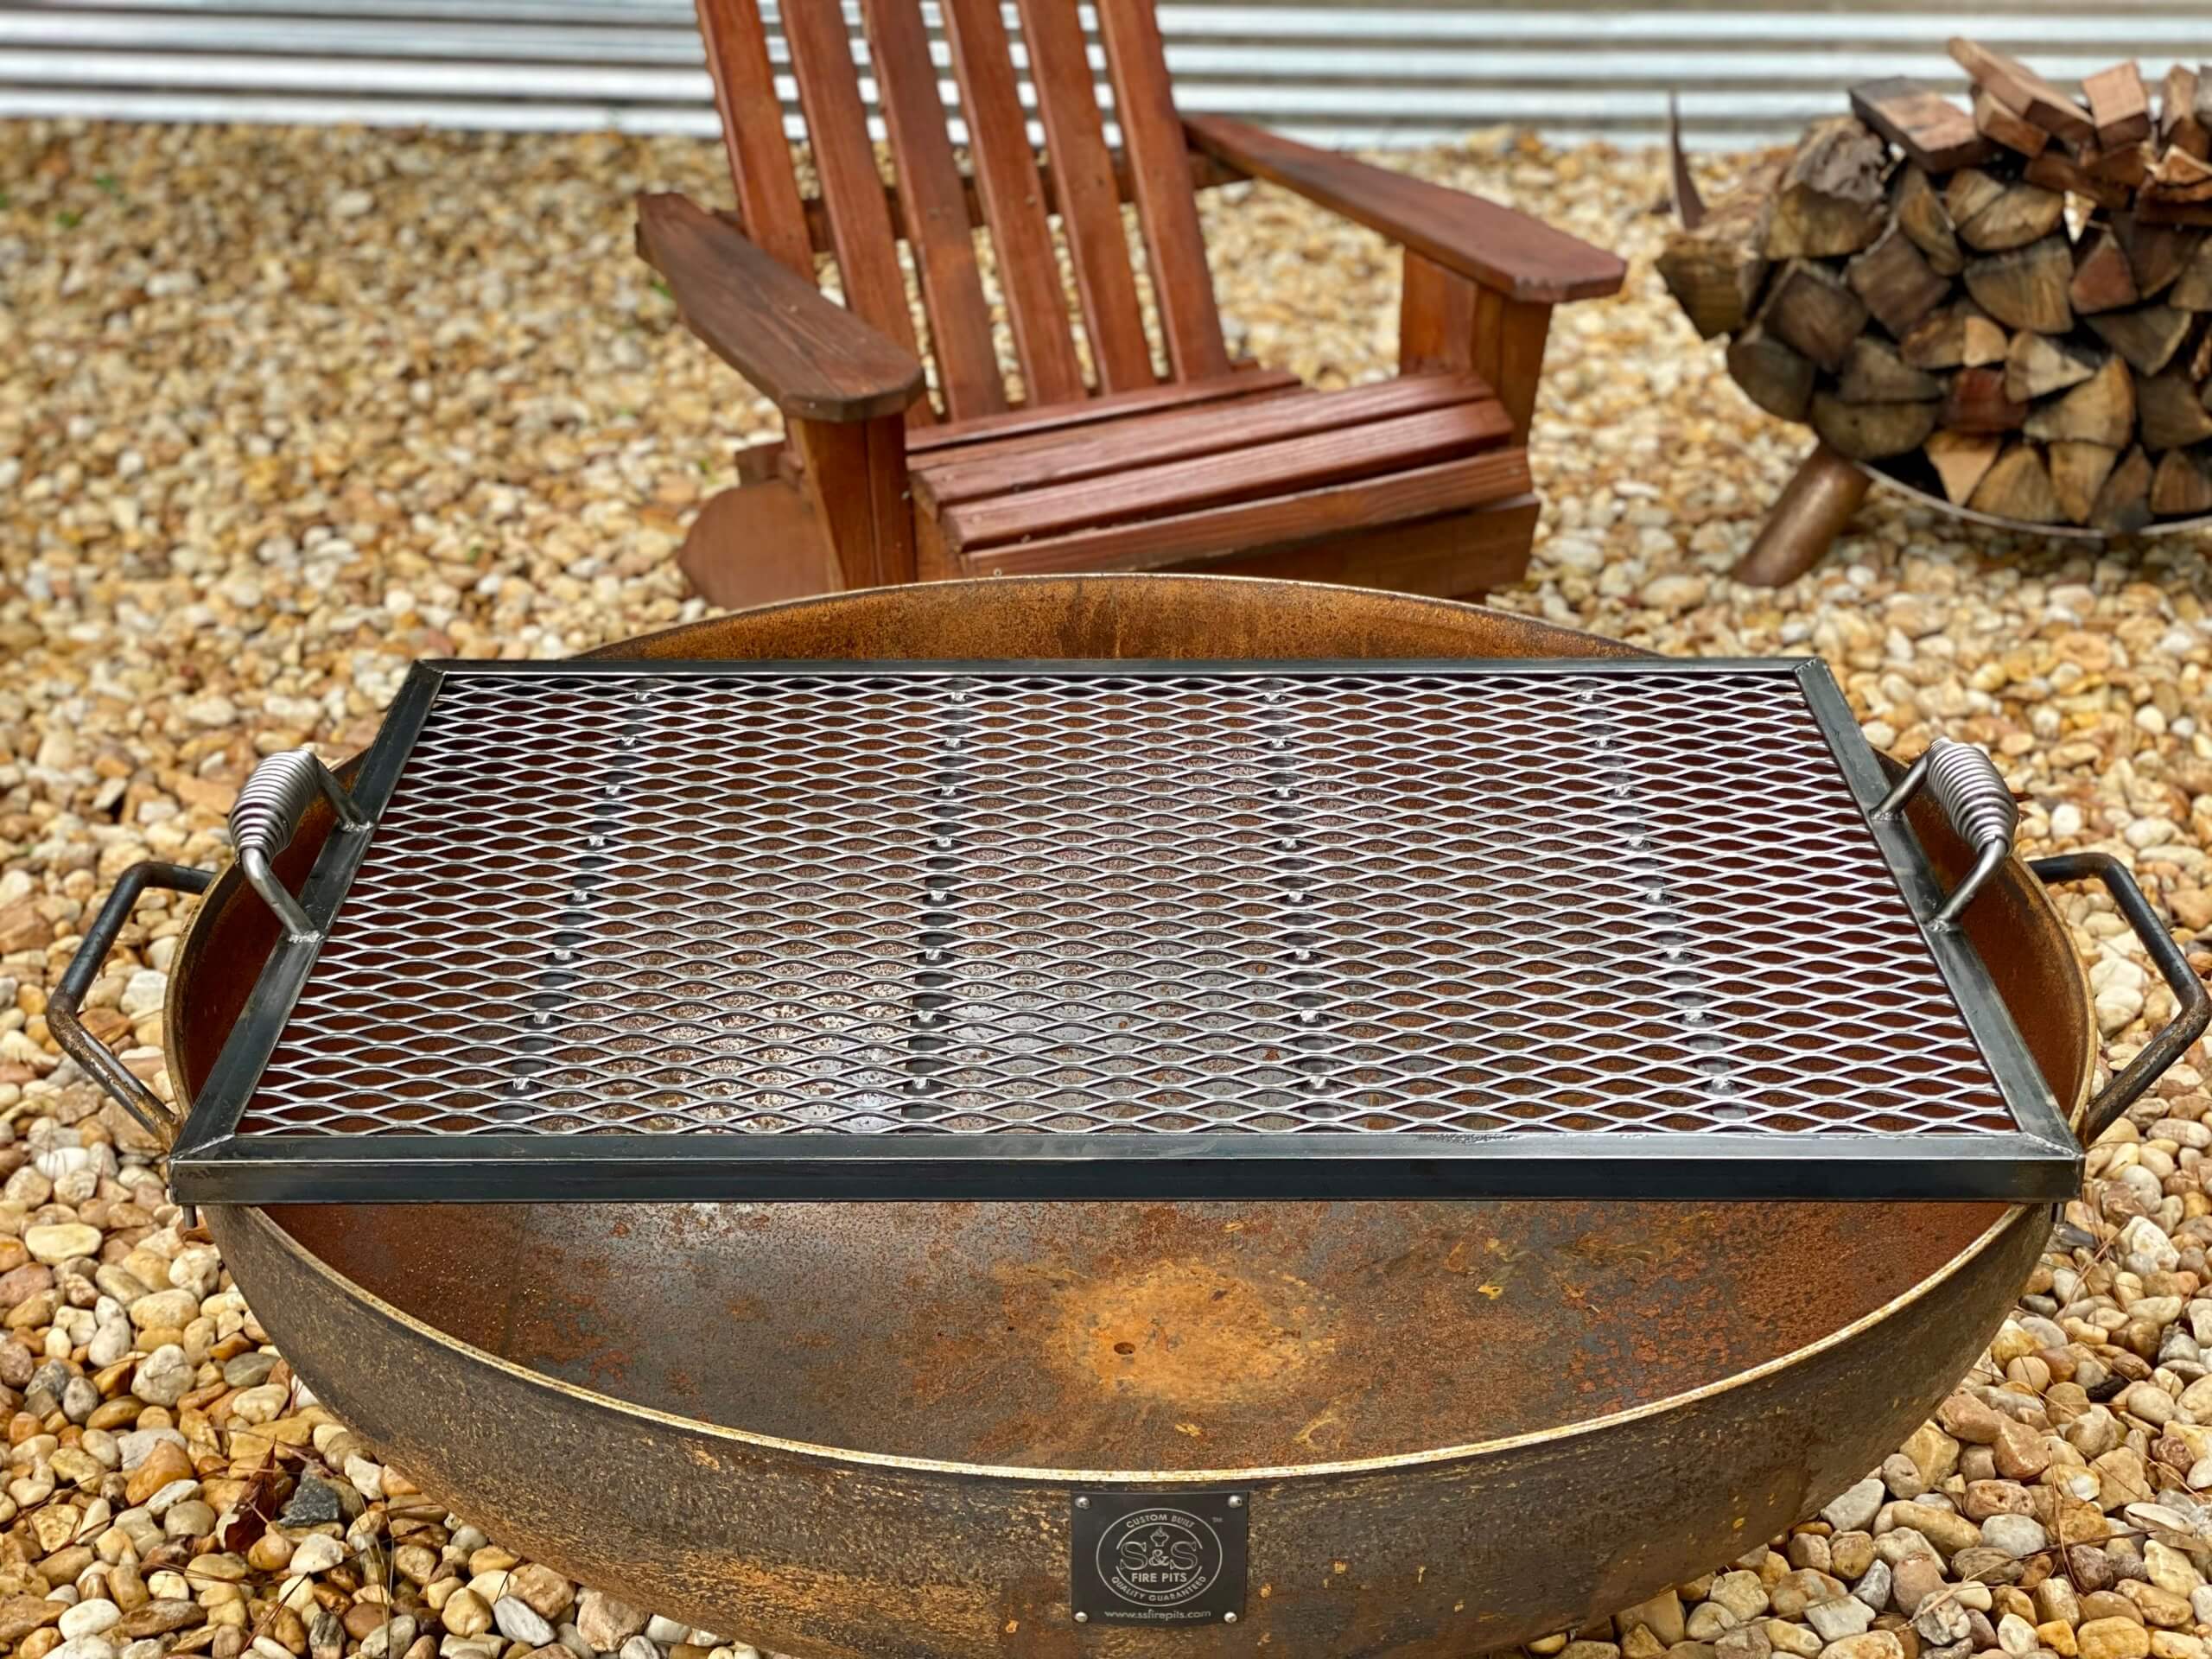 42 Heavy Duty Handcrafted Fire Pit, Round Fire Pit Cooking Grate